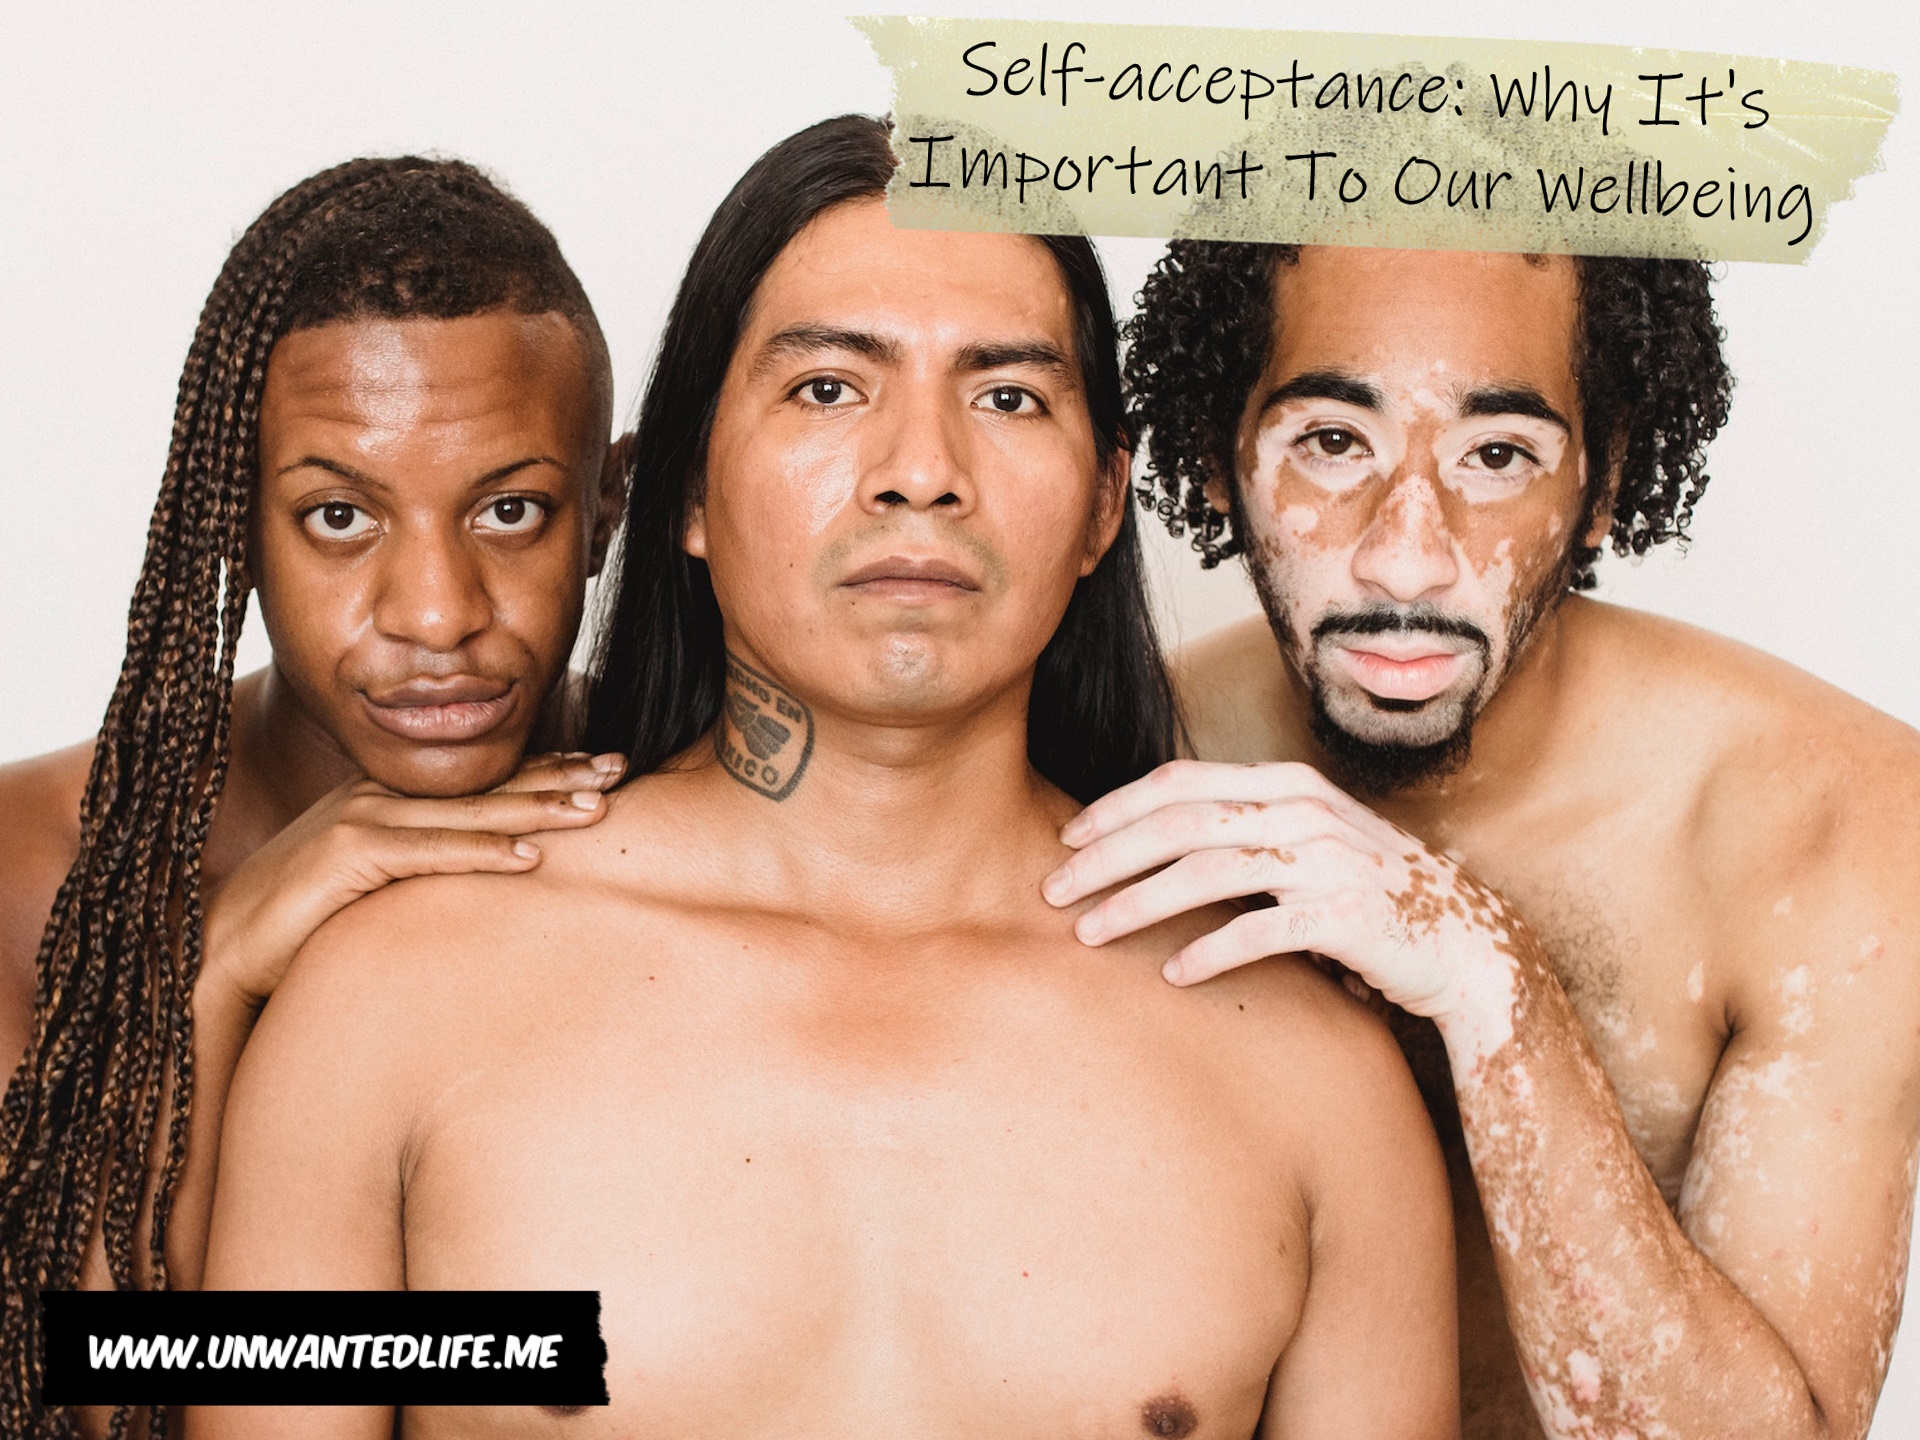 A photo of a gay Black man, a man of Native American ethnicity, and a Black man with vitiligo to represent the topic of the article - Self-acceptance: Why It's Important To Our Wellbeing